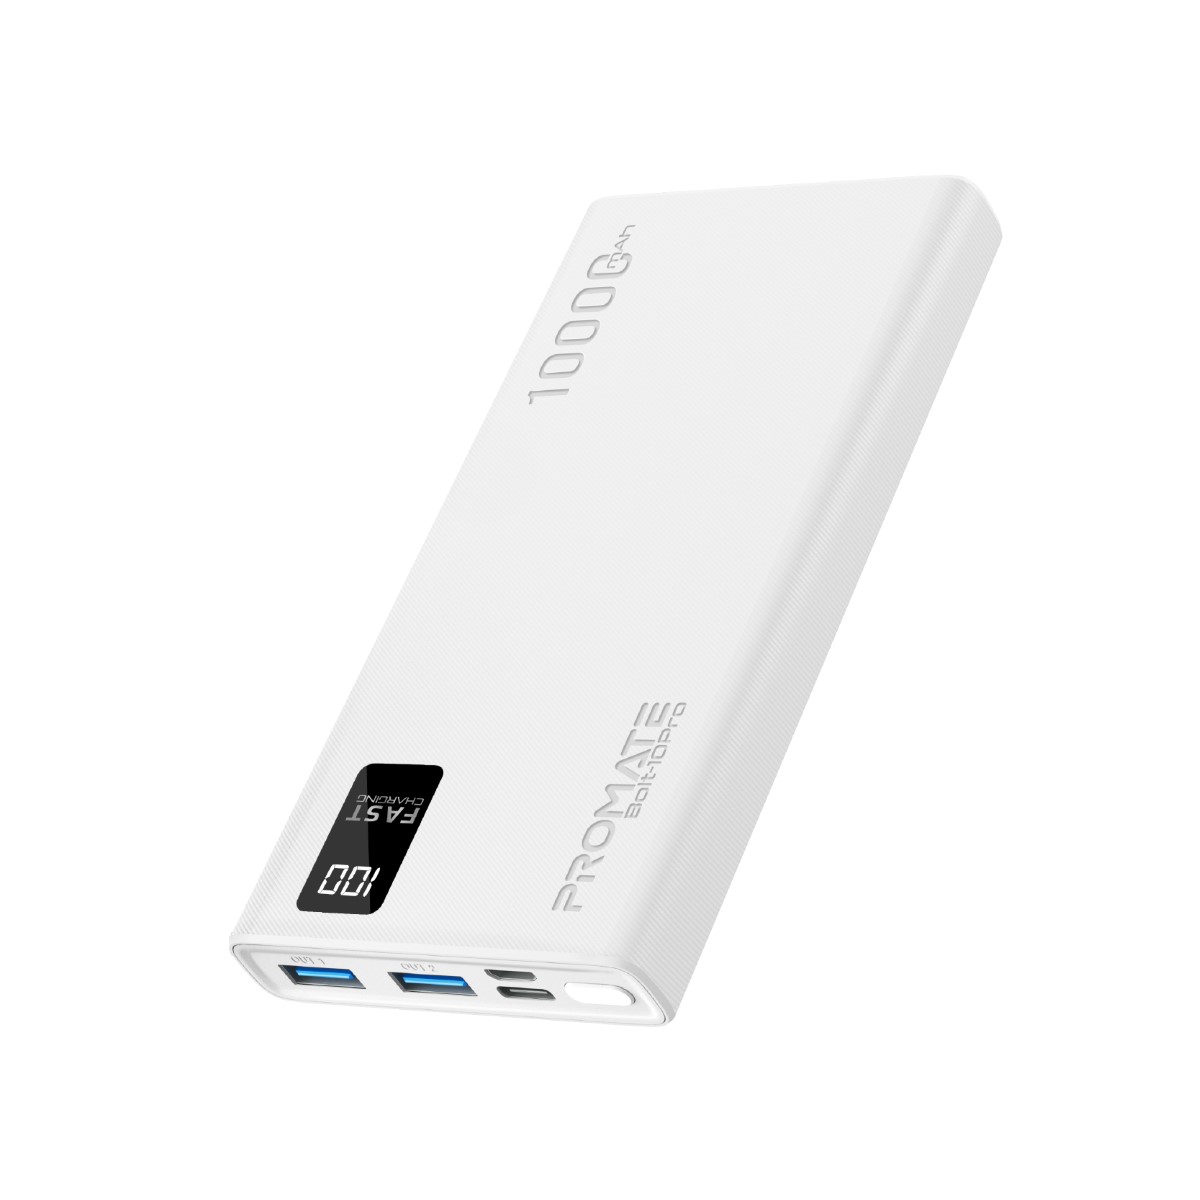 Promate Power Bank, Universal 10000mAh Ultra-Slim Portable Charger with 10W USB-C™ Input/Output Port, Dual USB Ports, LED Screen and Over-Heating Protection for iPhone 14, Galaxy S22, iPad Air, Bolt-10Pro.White